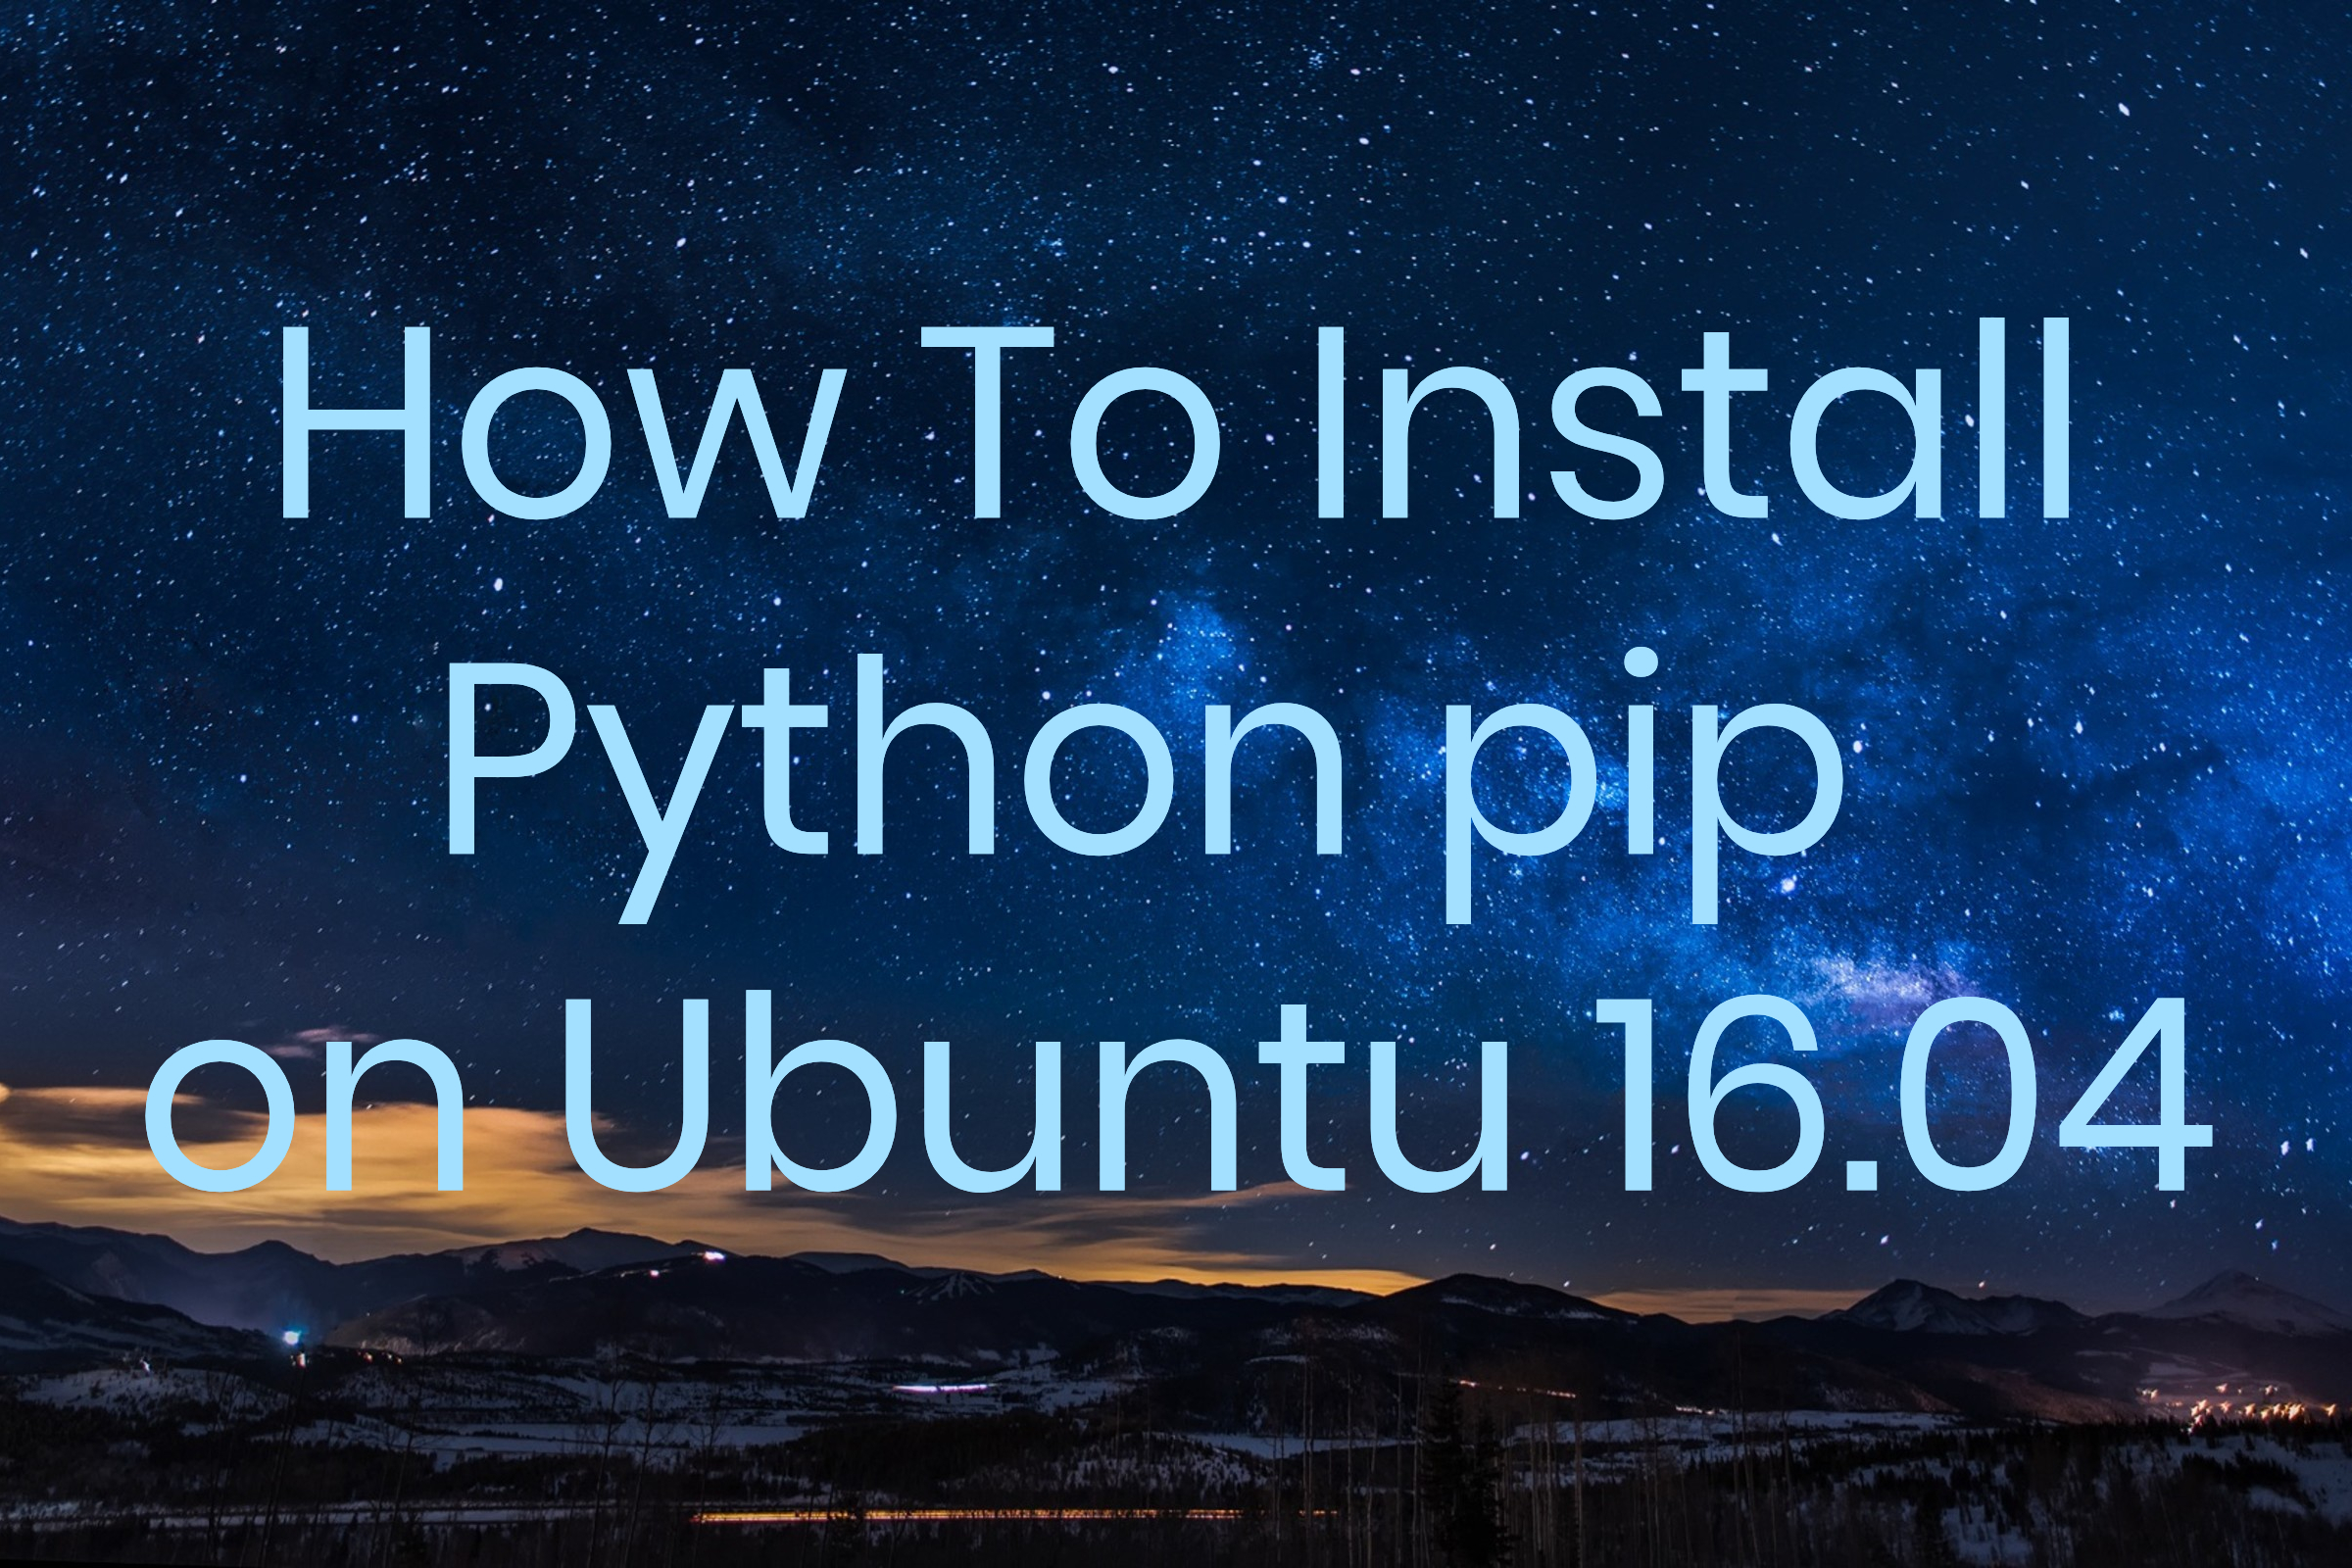 install pip3 and pip